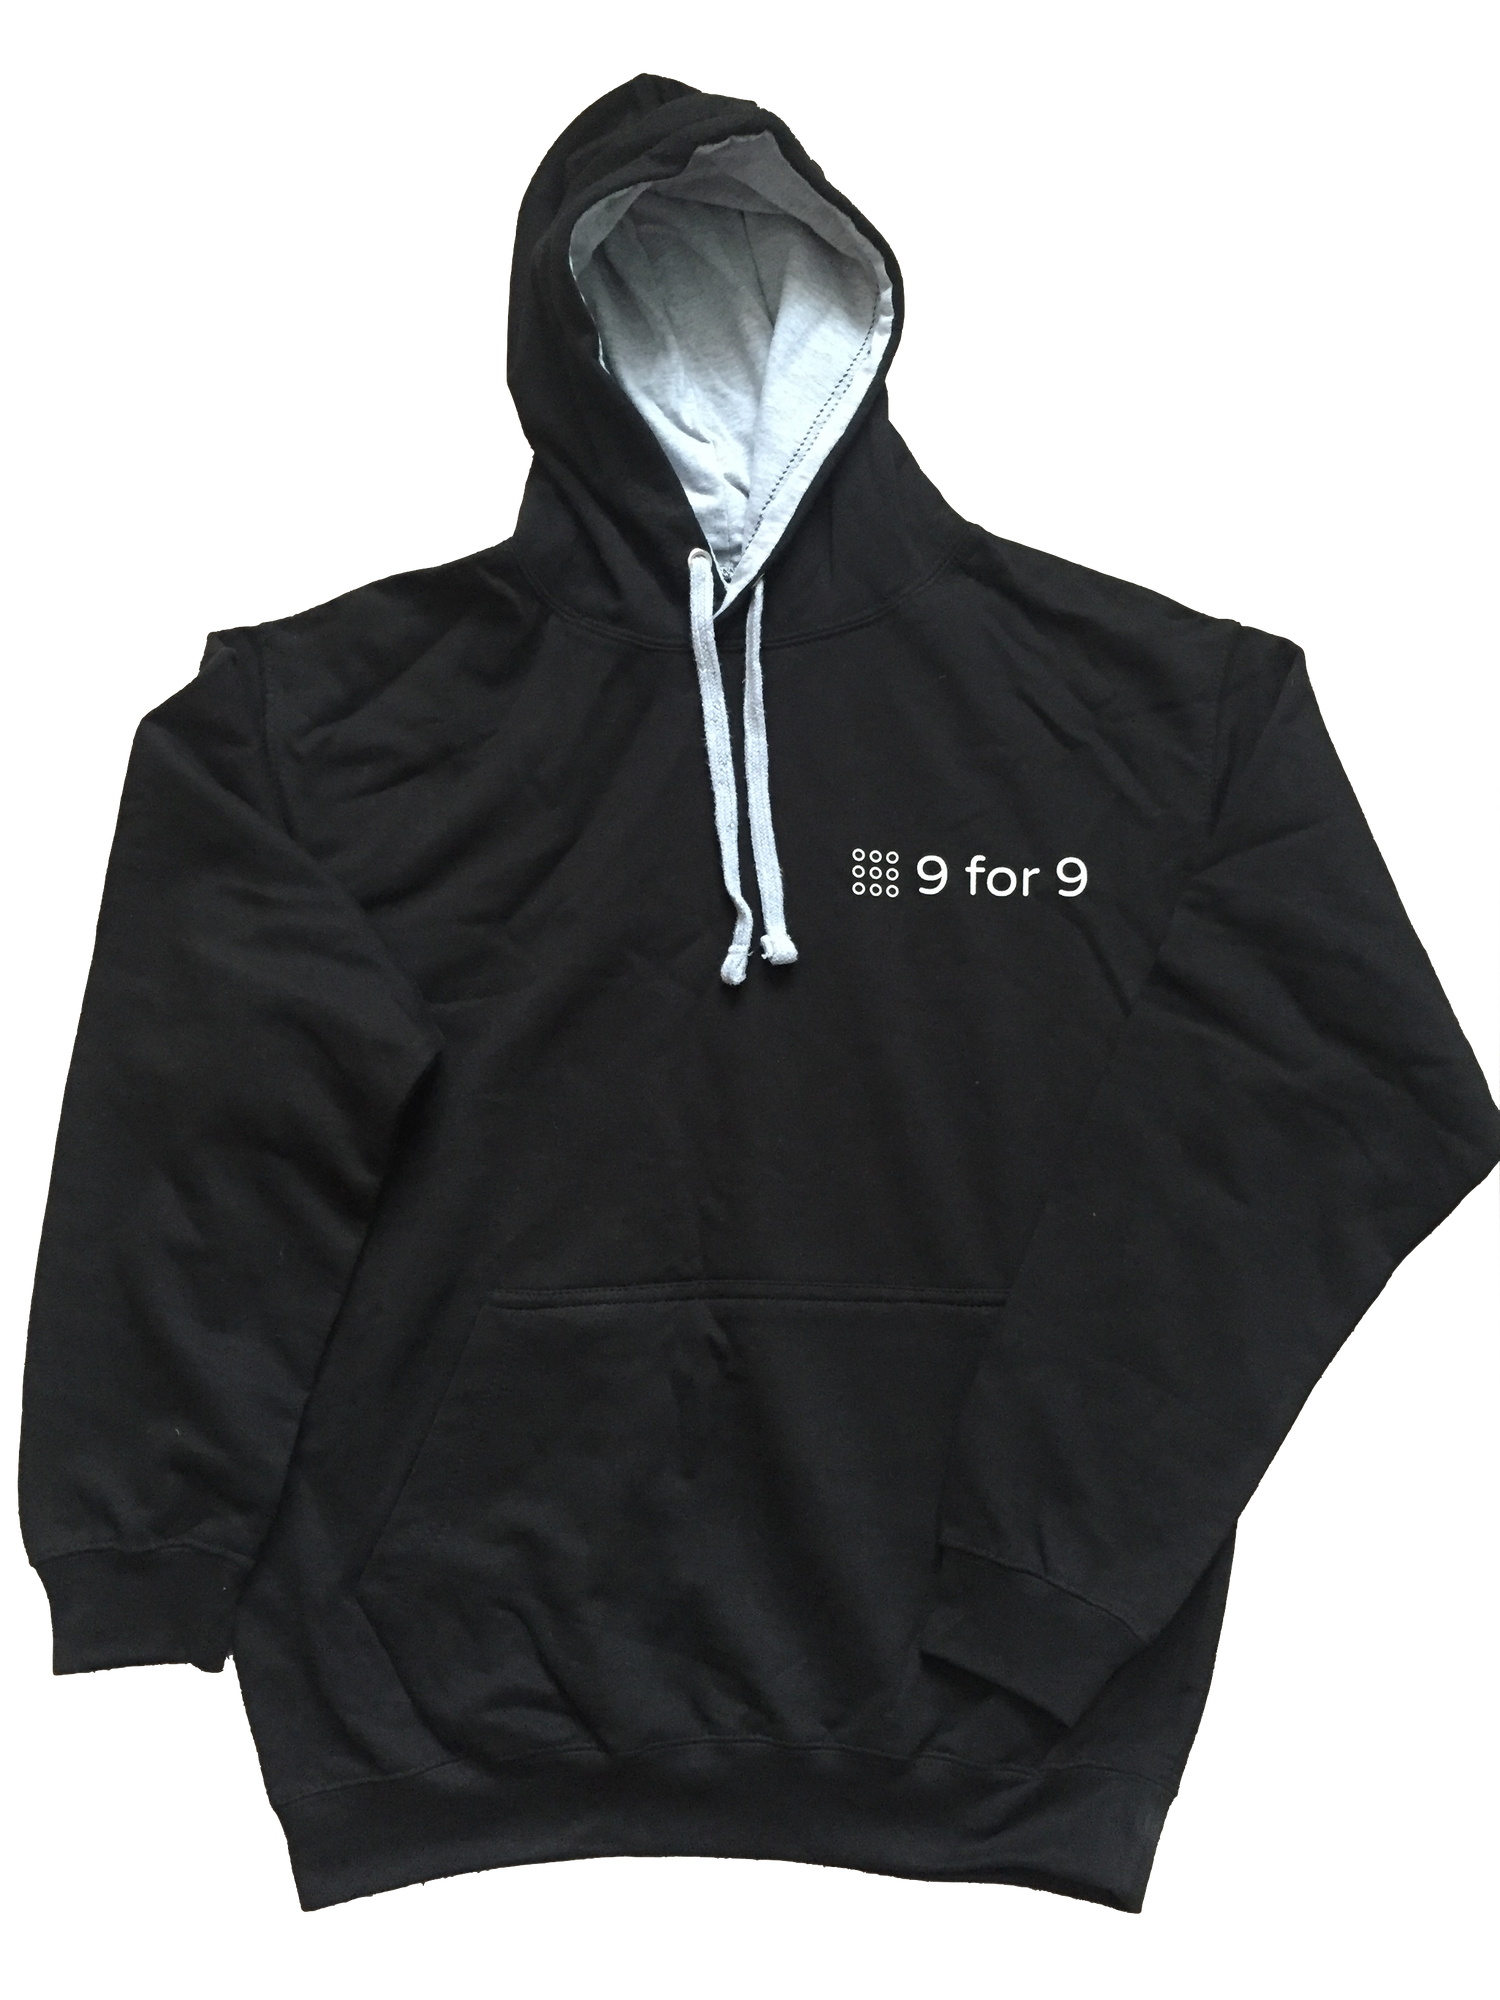 9 for 9 Hoodie (Unisex) - 9 for 9